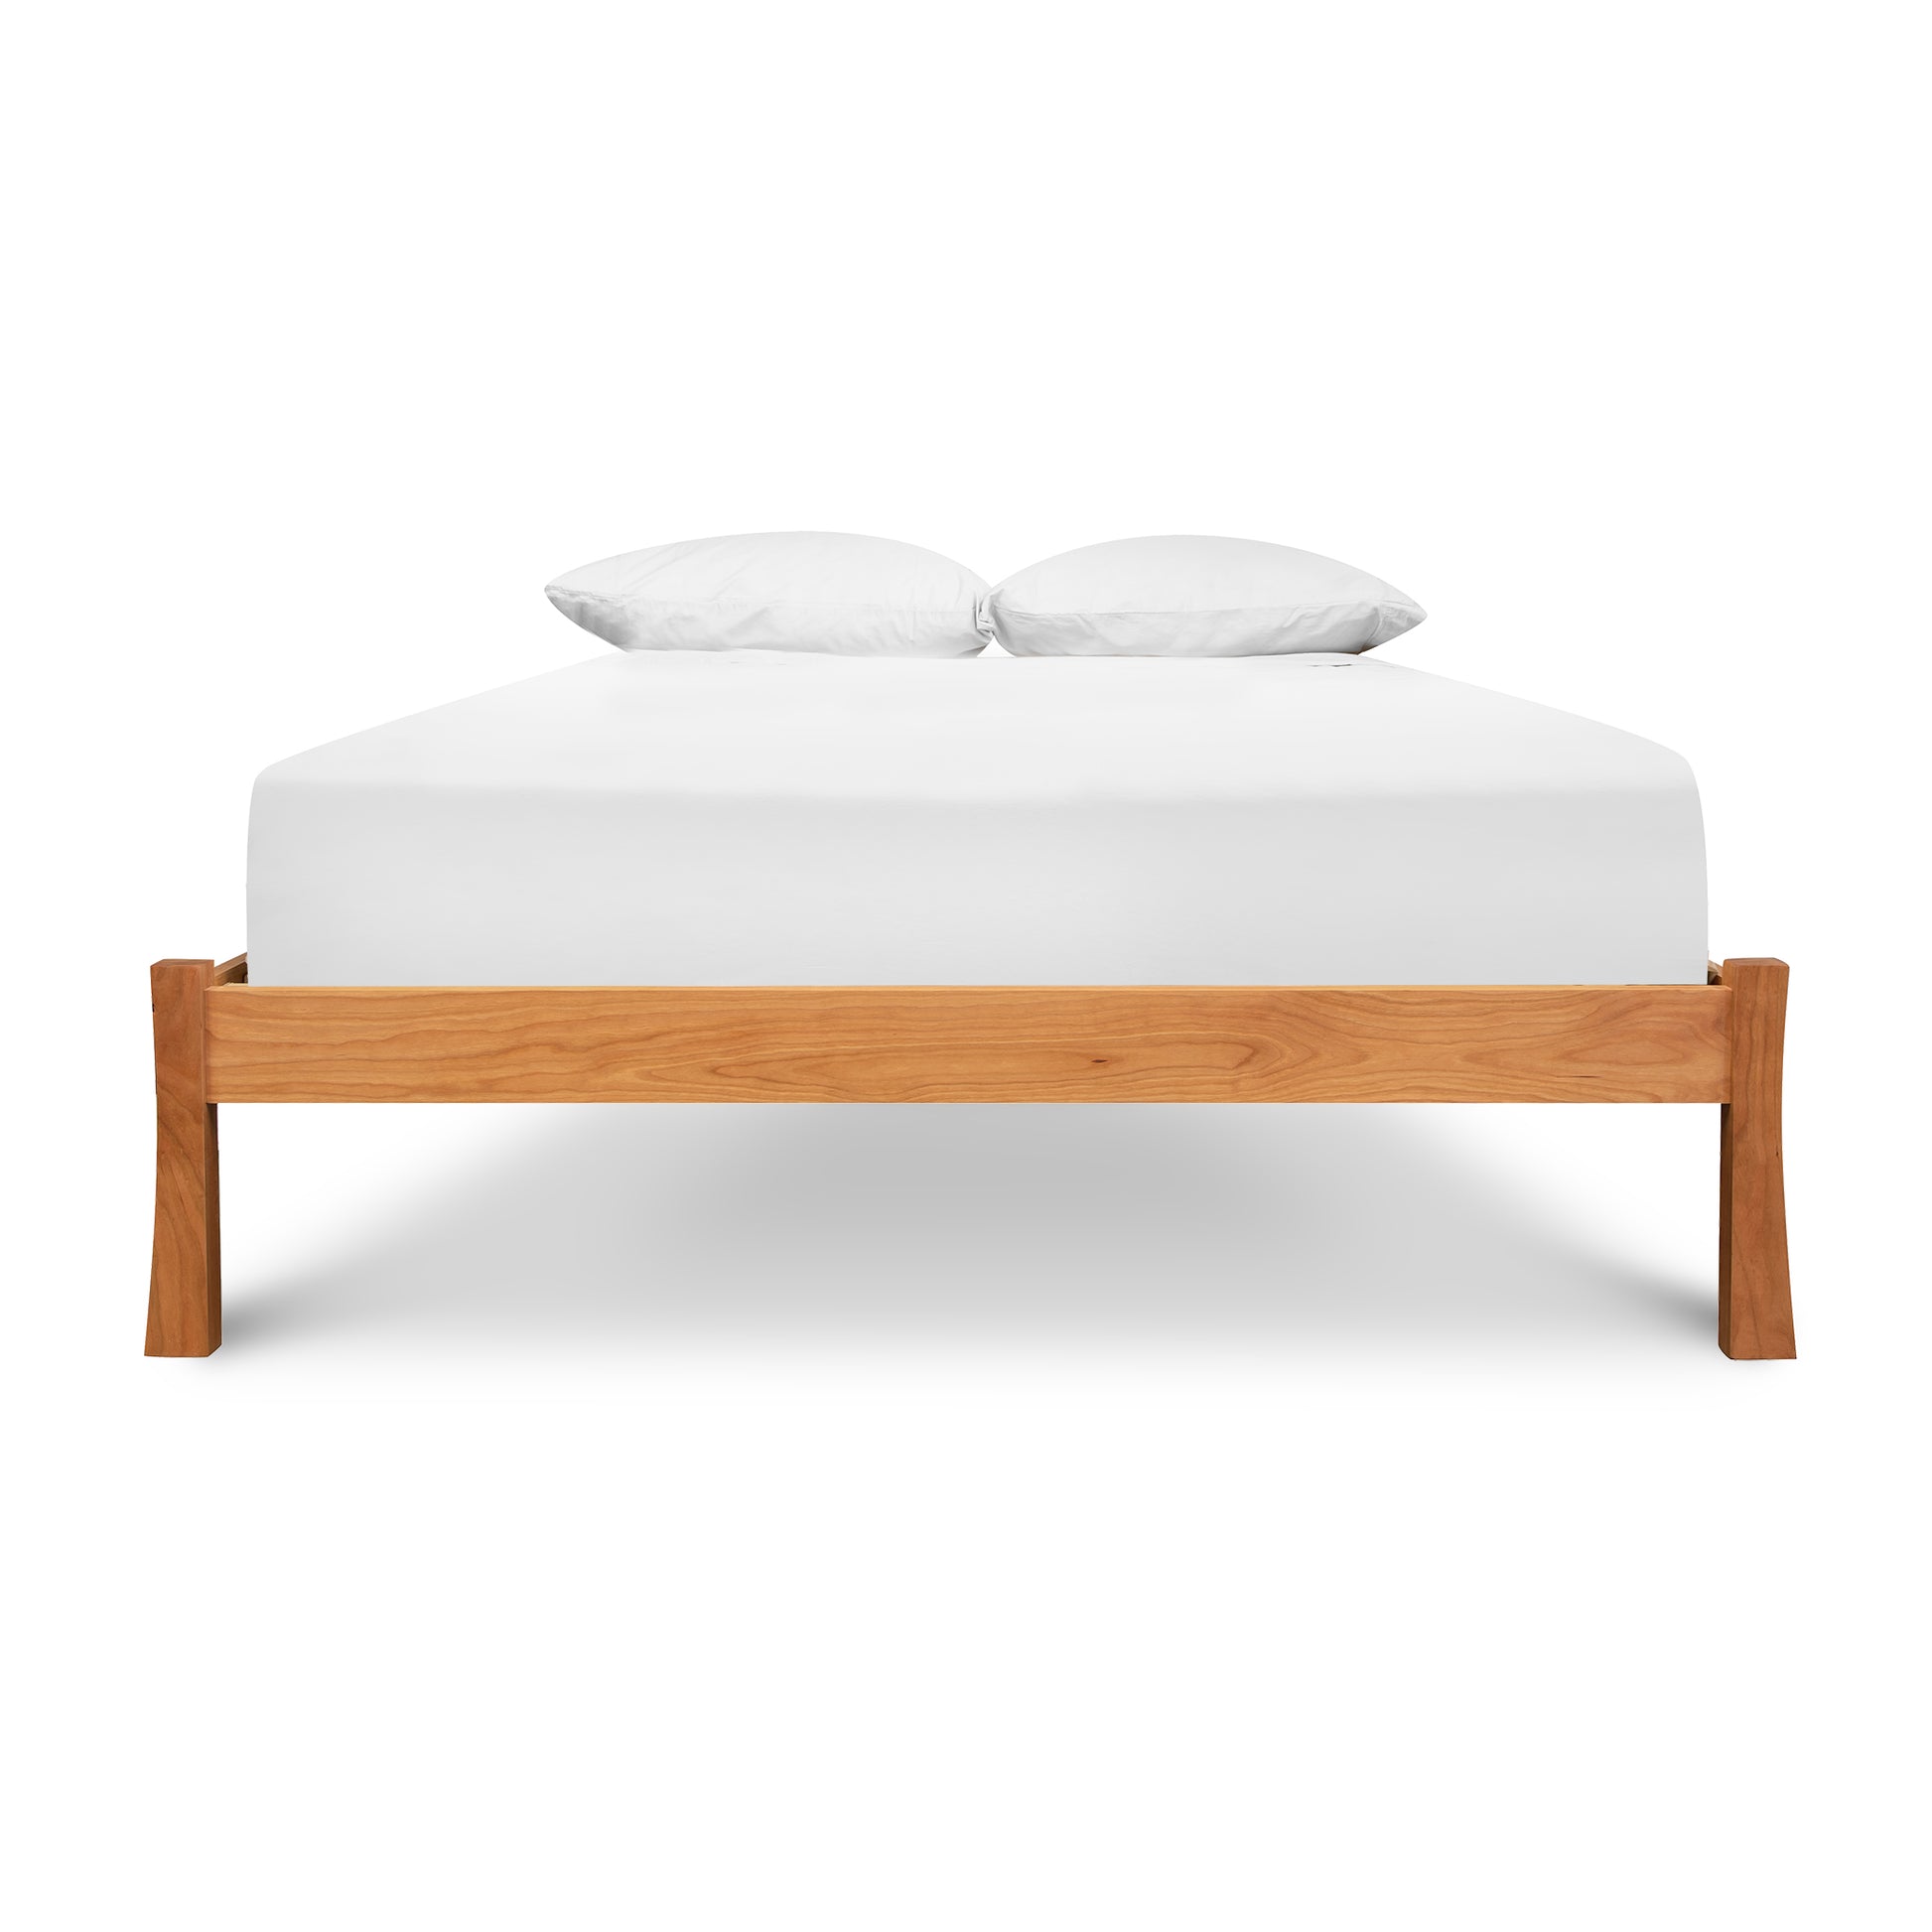 A Vermont Furniture Designs Contemporary Craftsman Studio-Style Platform Bed frame made from sustainably sourced hardwood, supporting a mattress covered with a white fitted sheet and two pillows at the head of the bed, isolated on a white